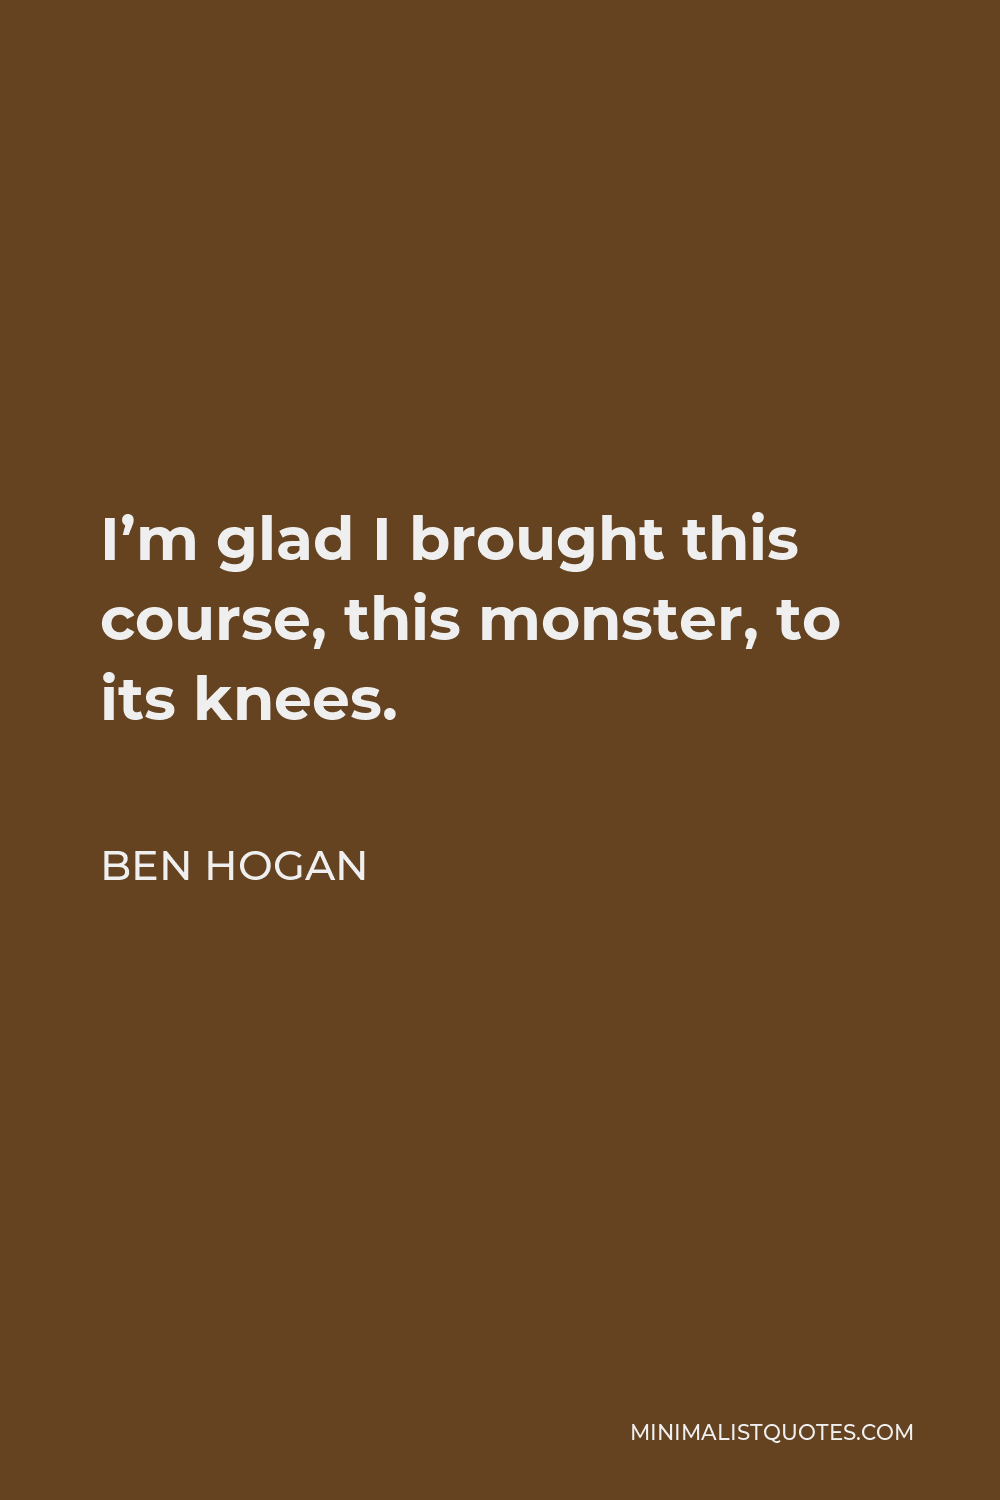 Ben Hogan Quote - I’m glad I brought this course, this monster, to its knees.